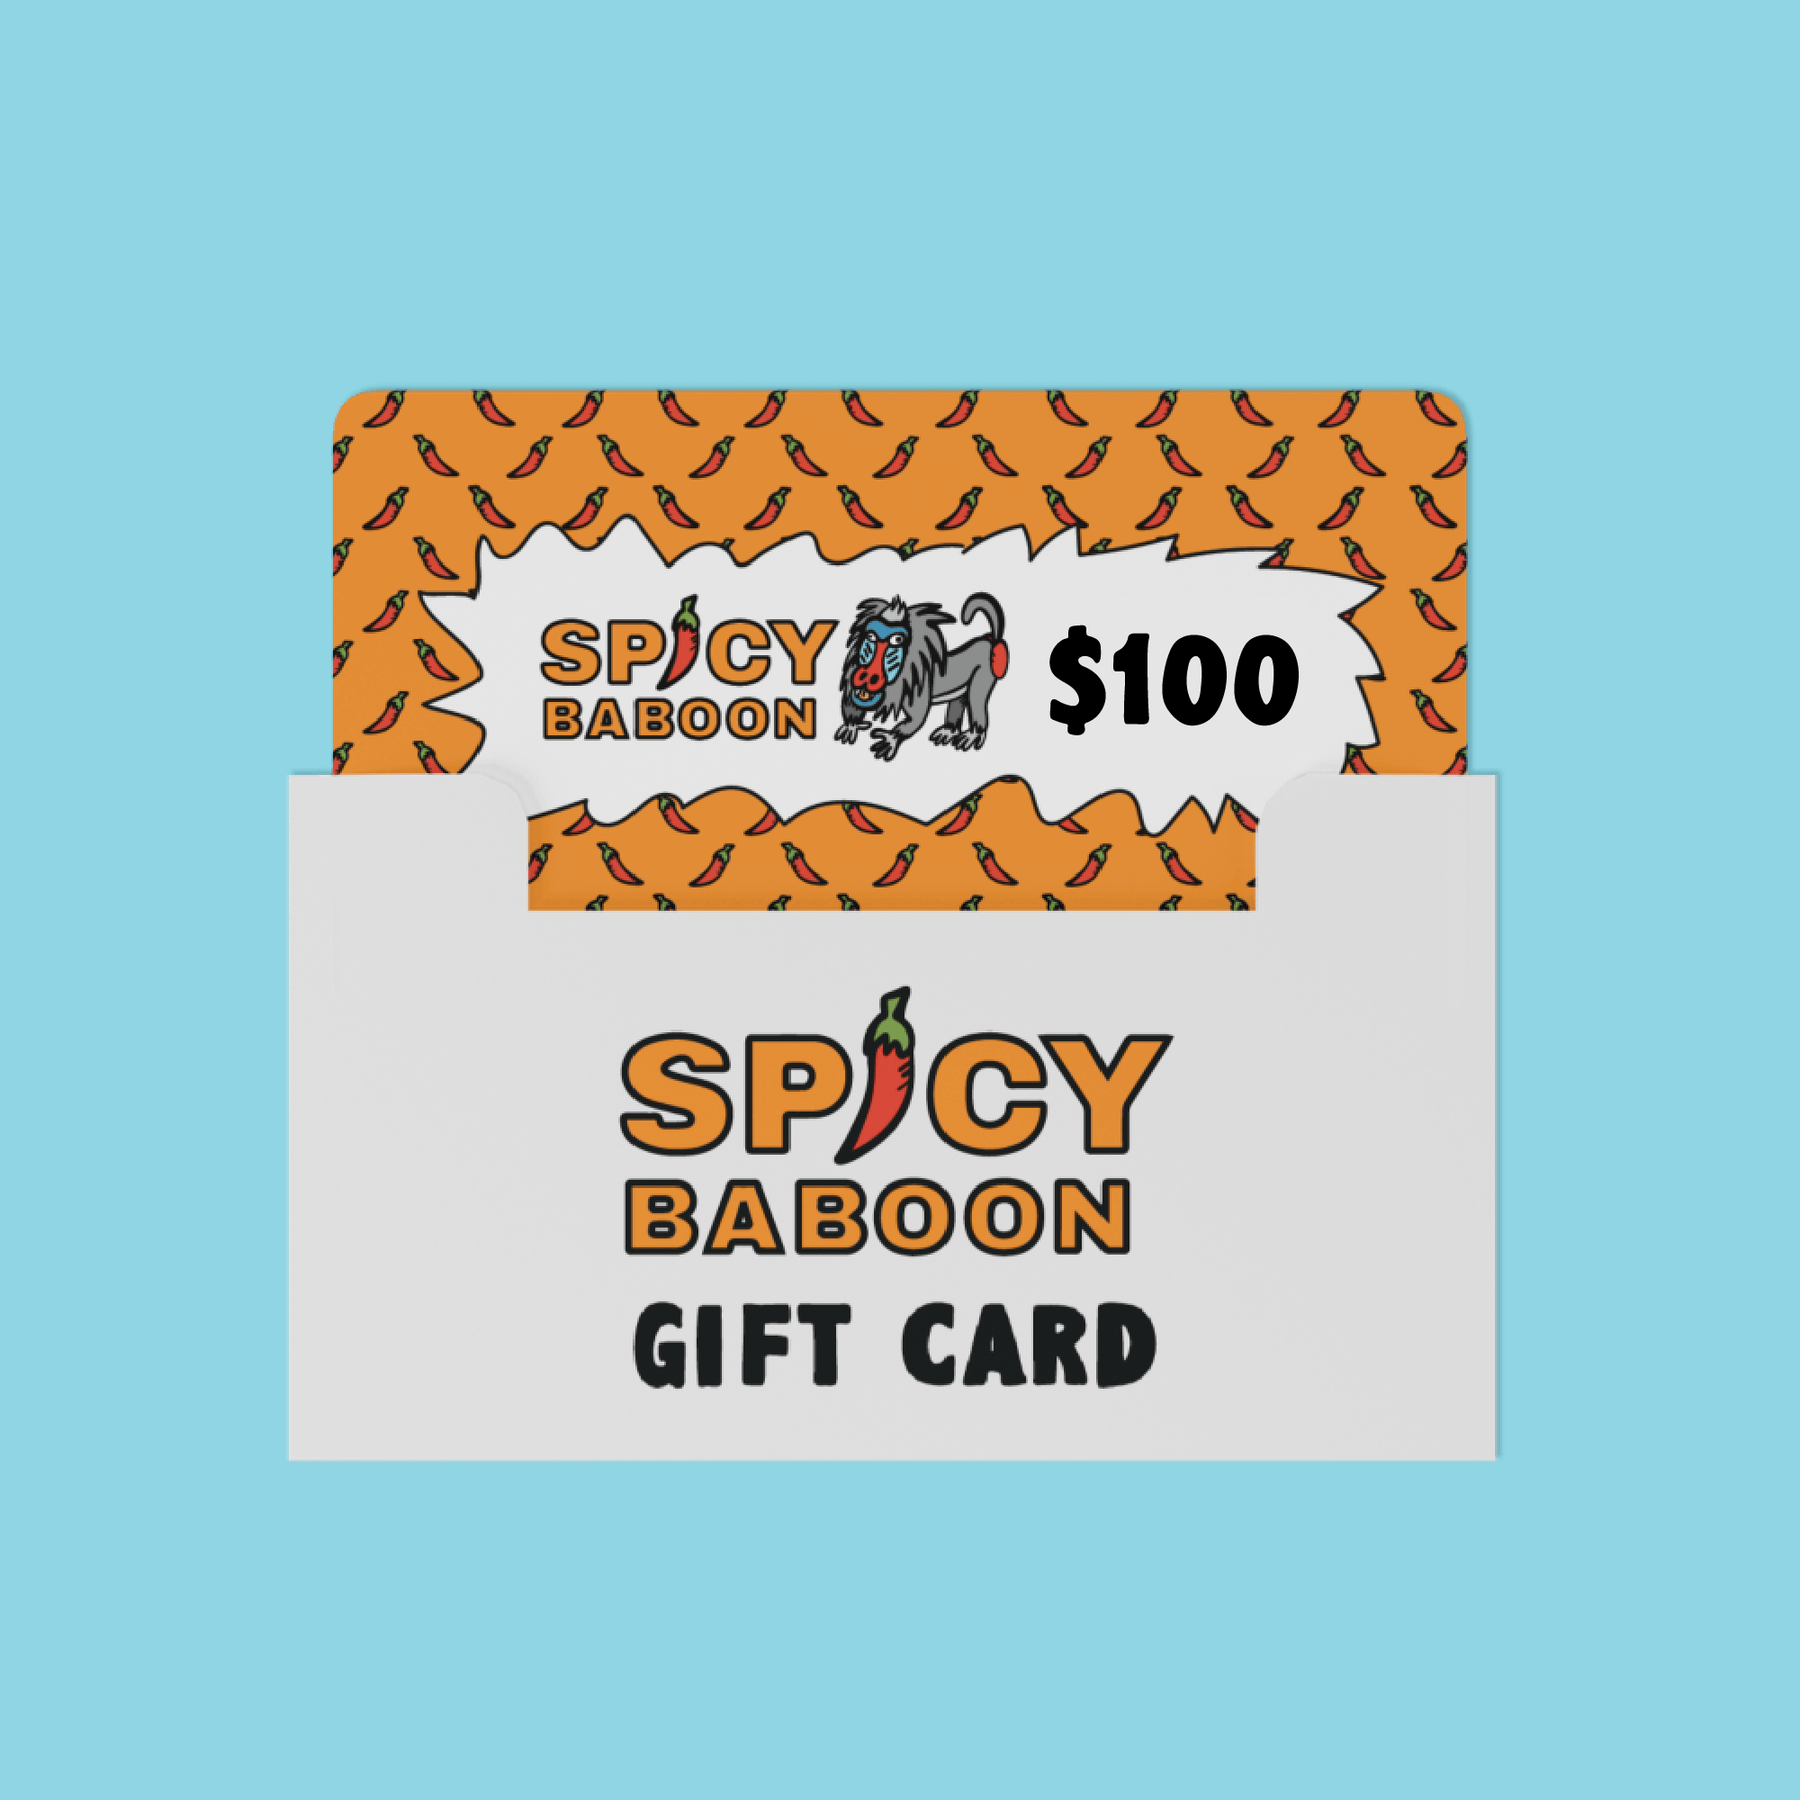 $100.00 Spicy Baboon Gift Card 🤑